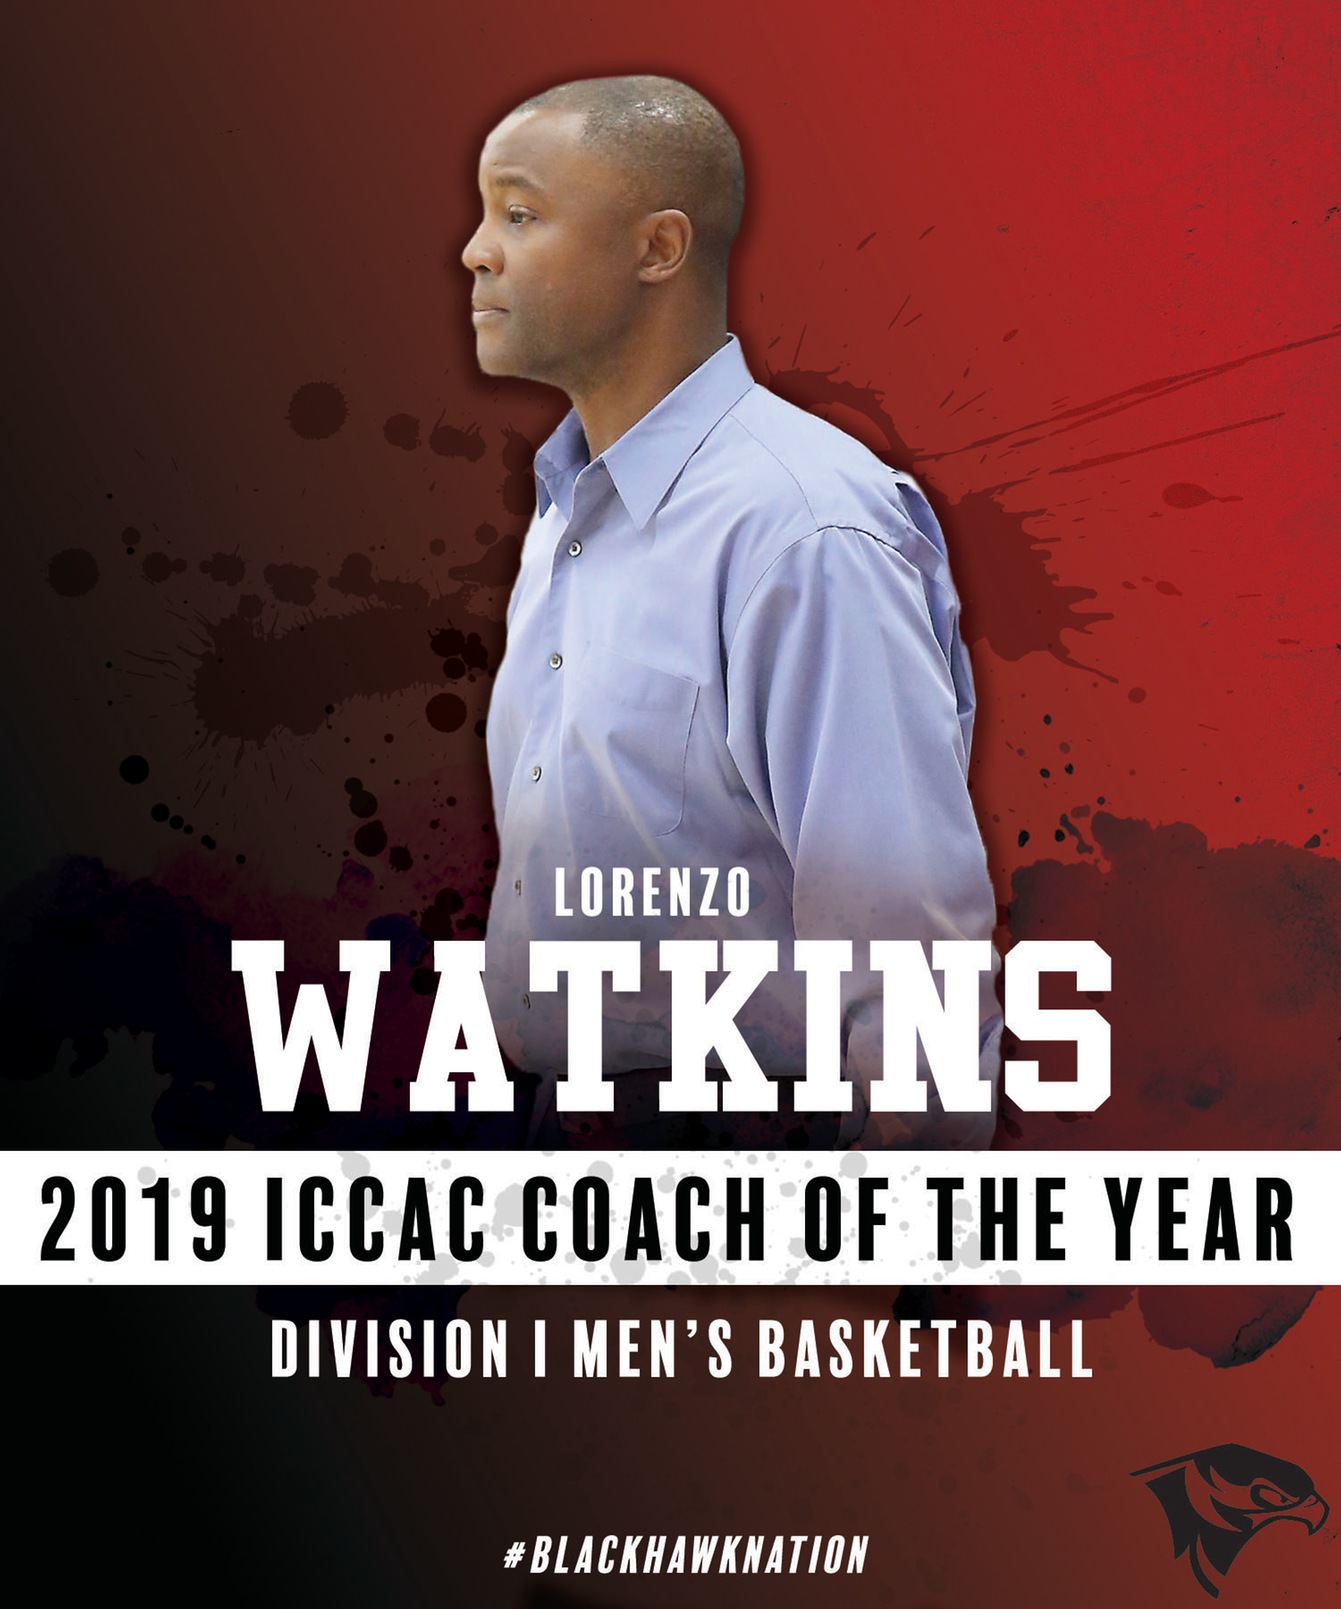 Coach Watkins Earns 2019 ICCAC Coach of the Year